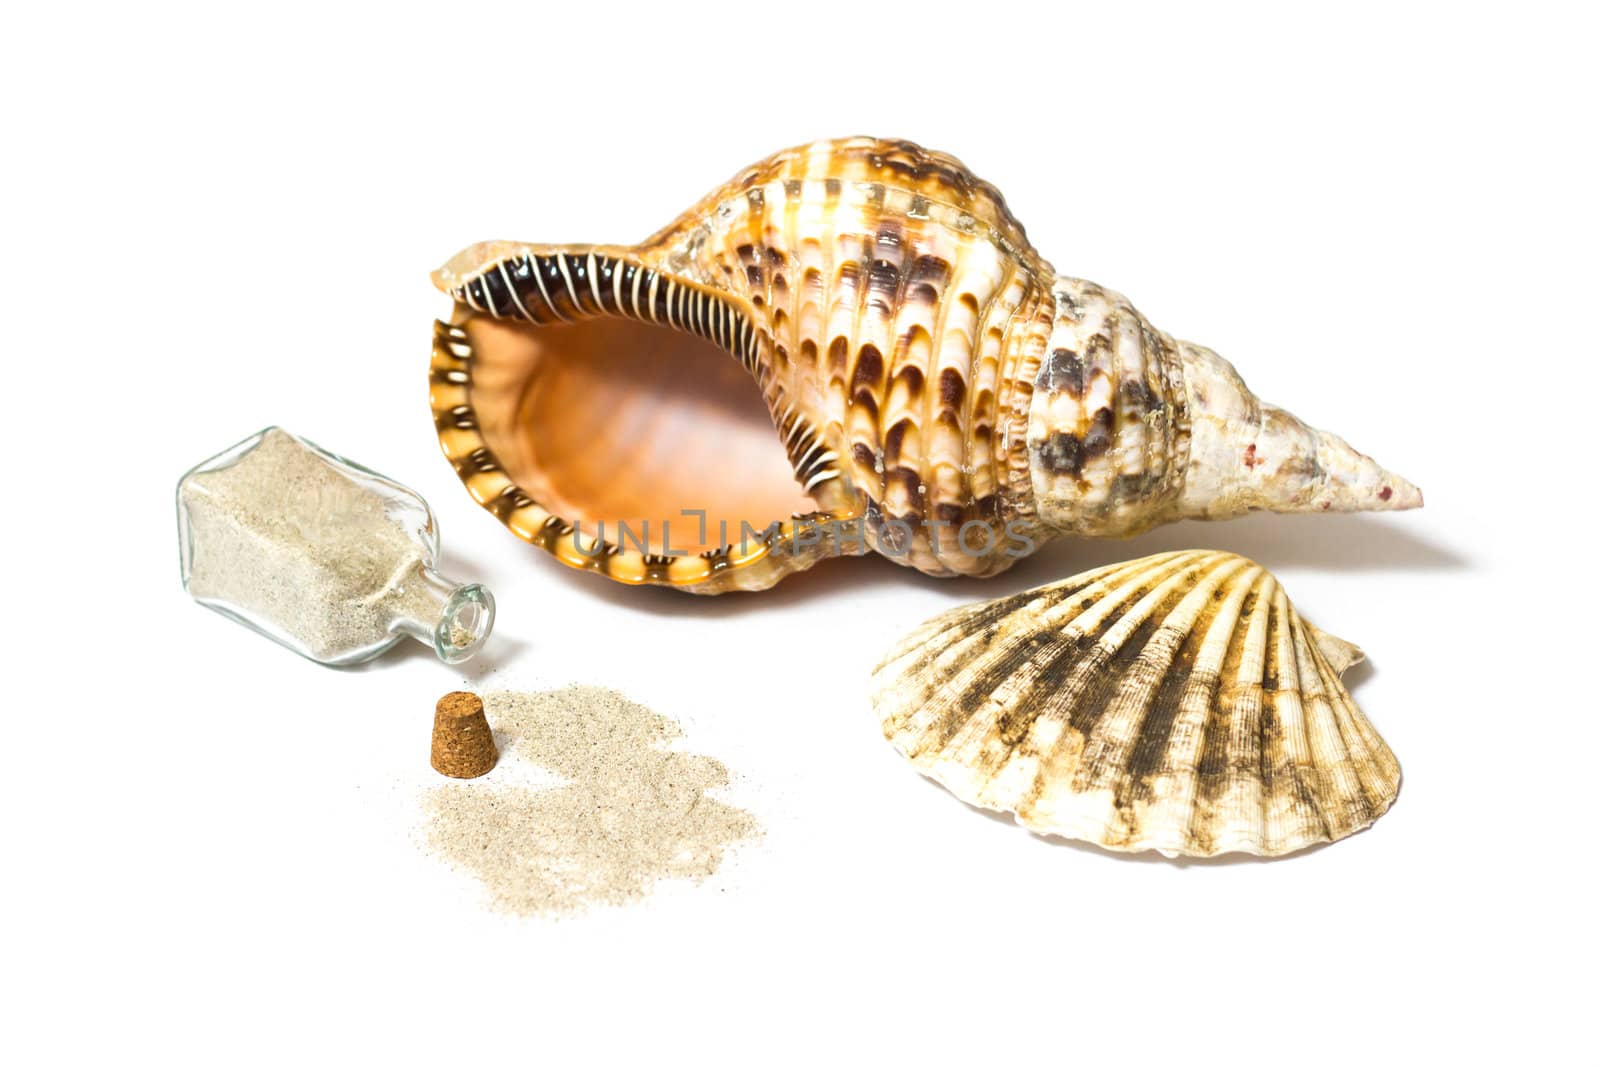 Marine sea shells and open sand bottle composition in a studio on white background